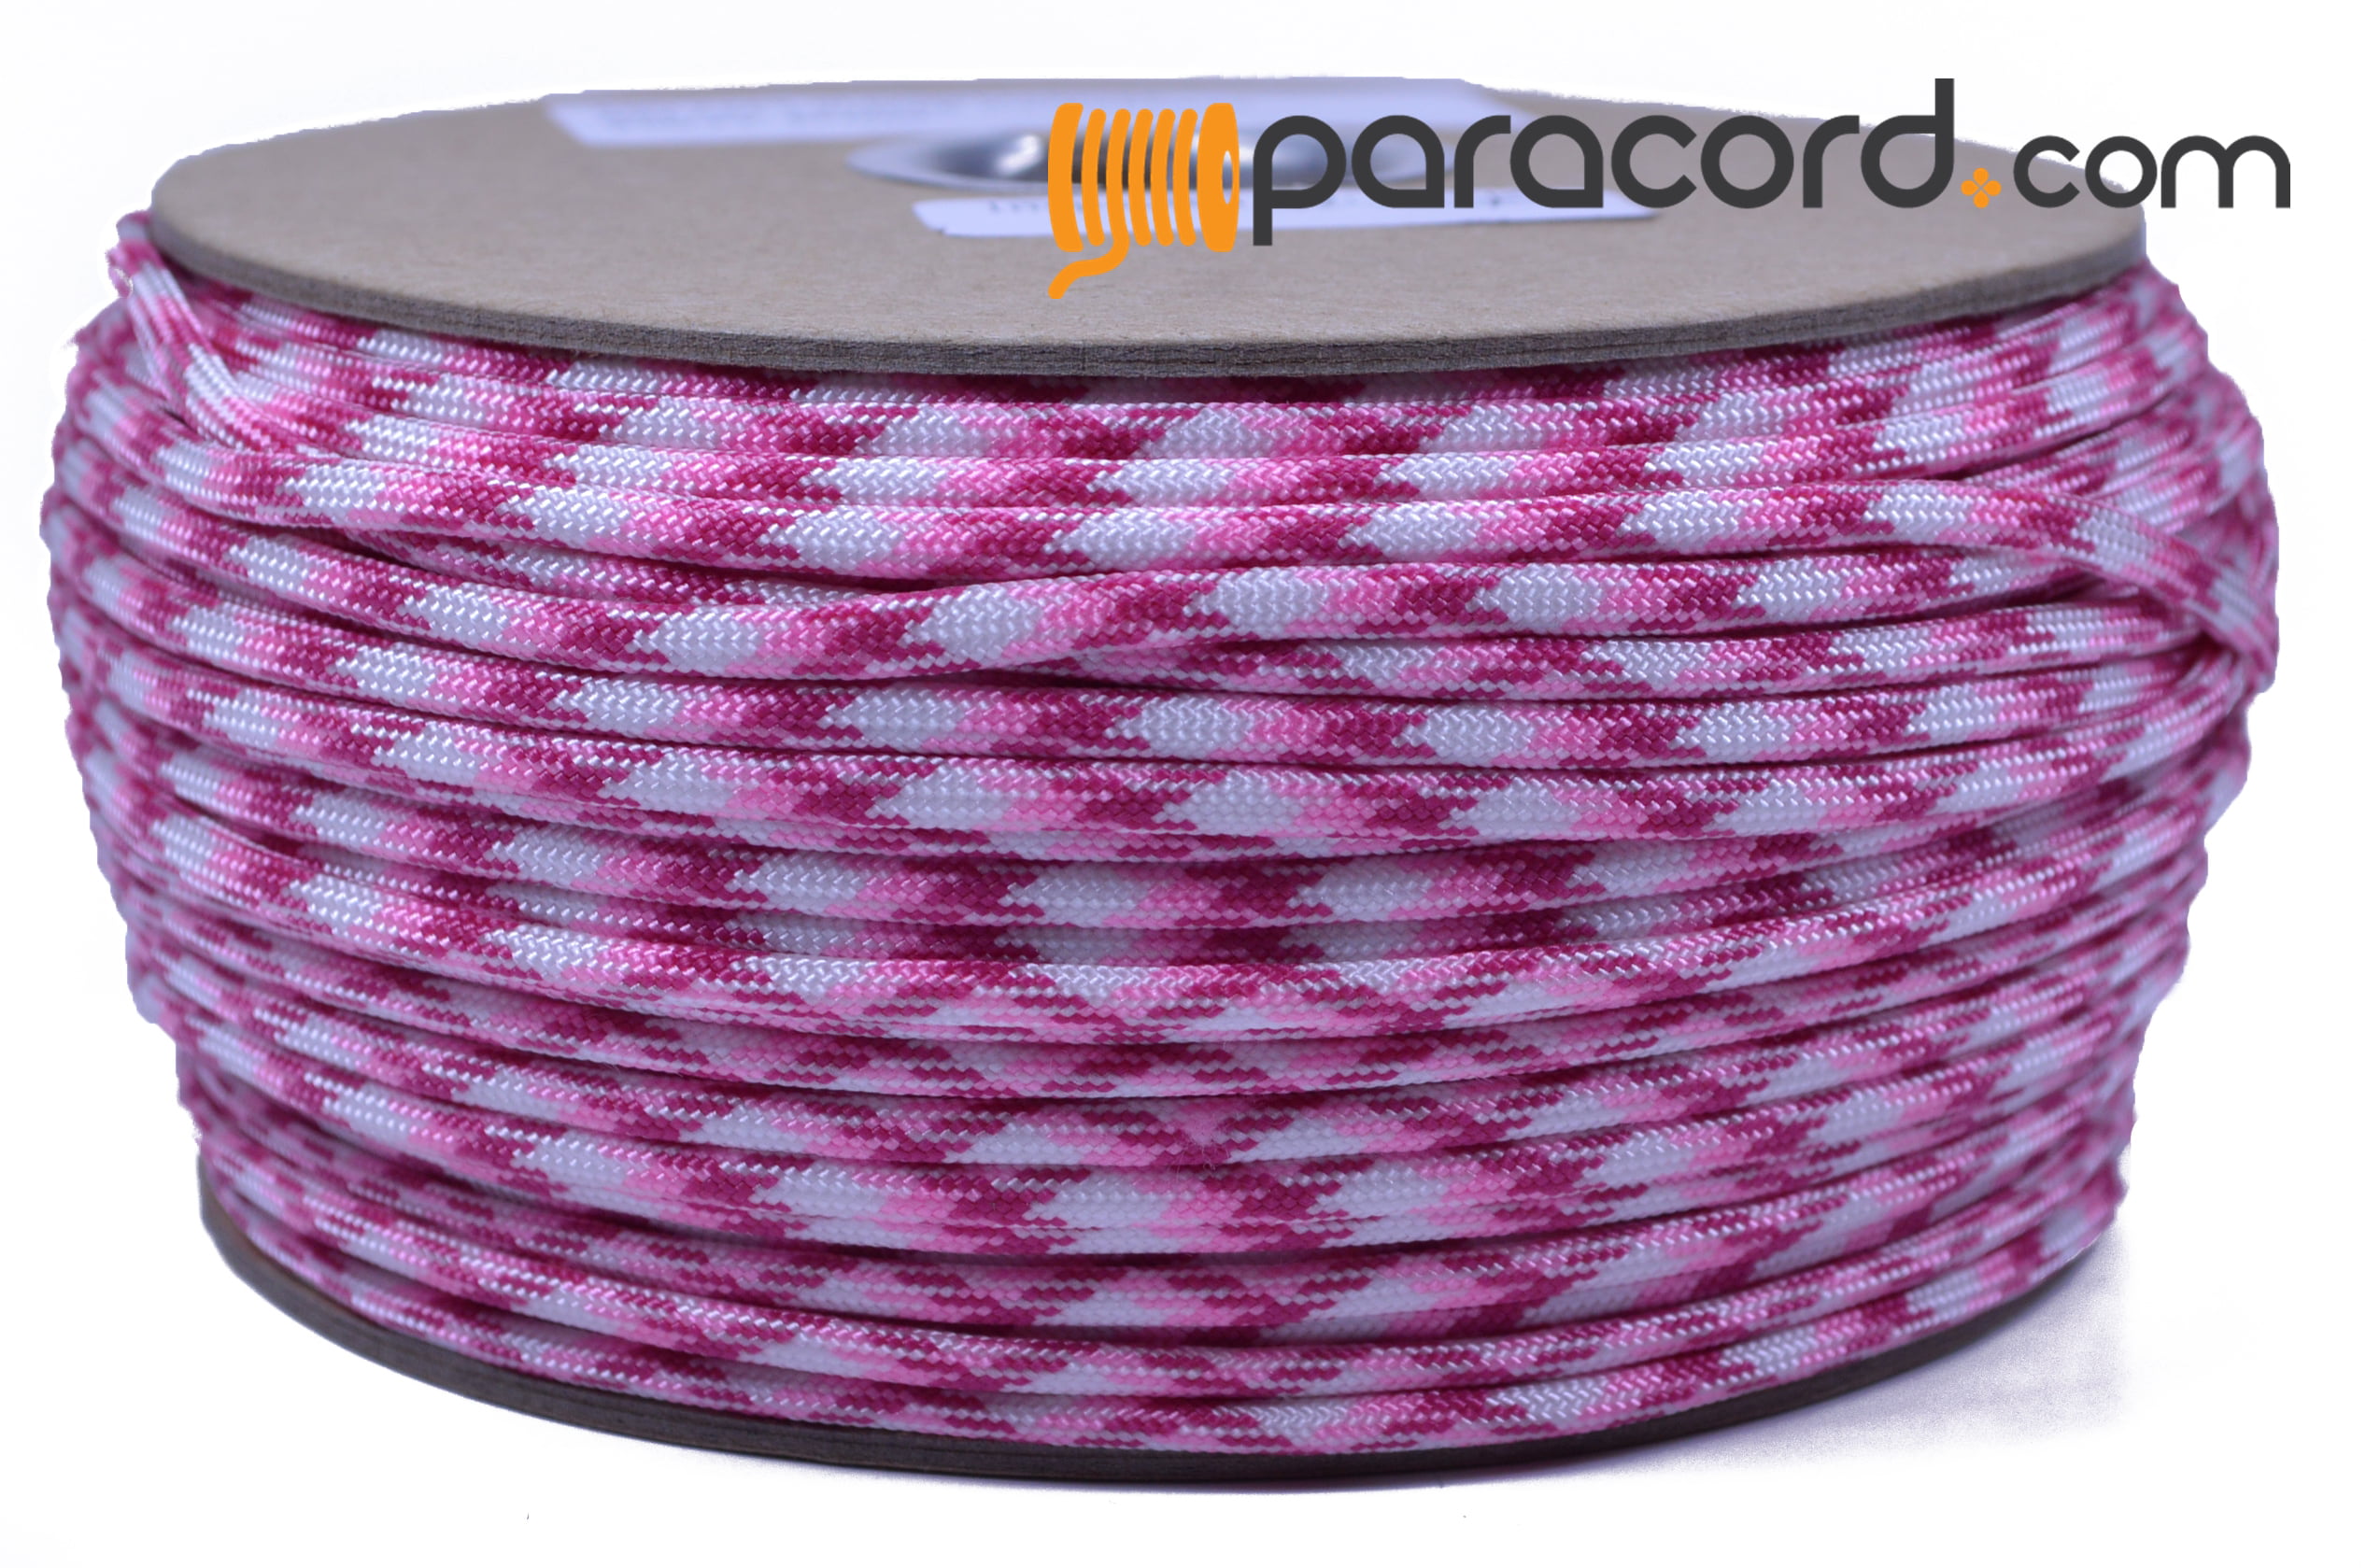 250 Feet Spool Bored Paracord 550 Type III Paracord Breast Cancer Awareness 